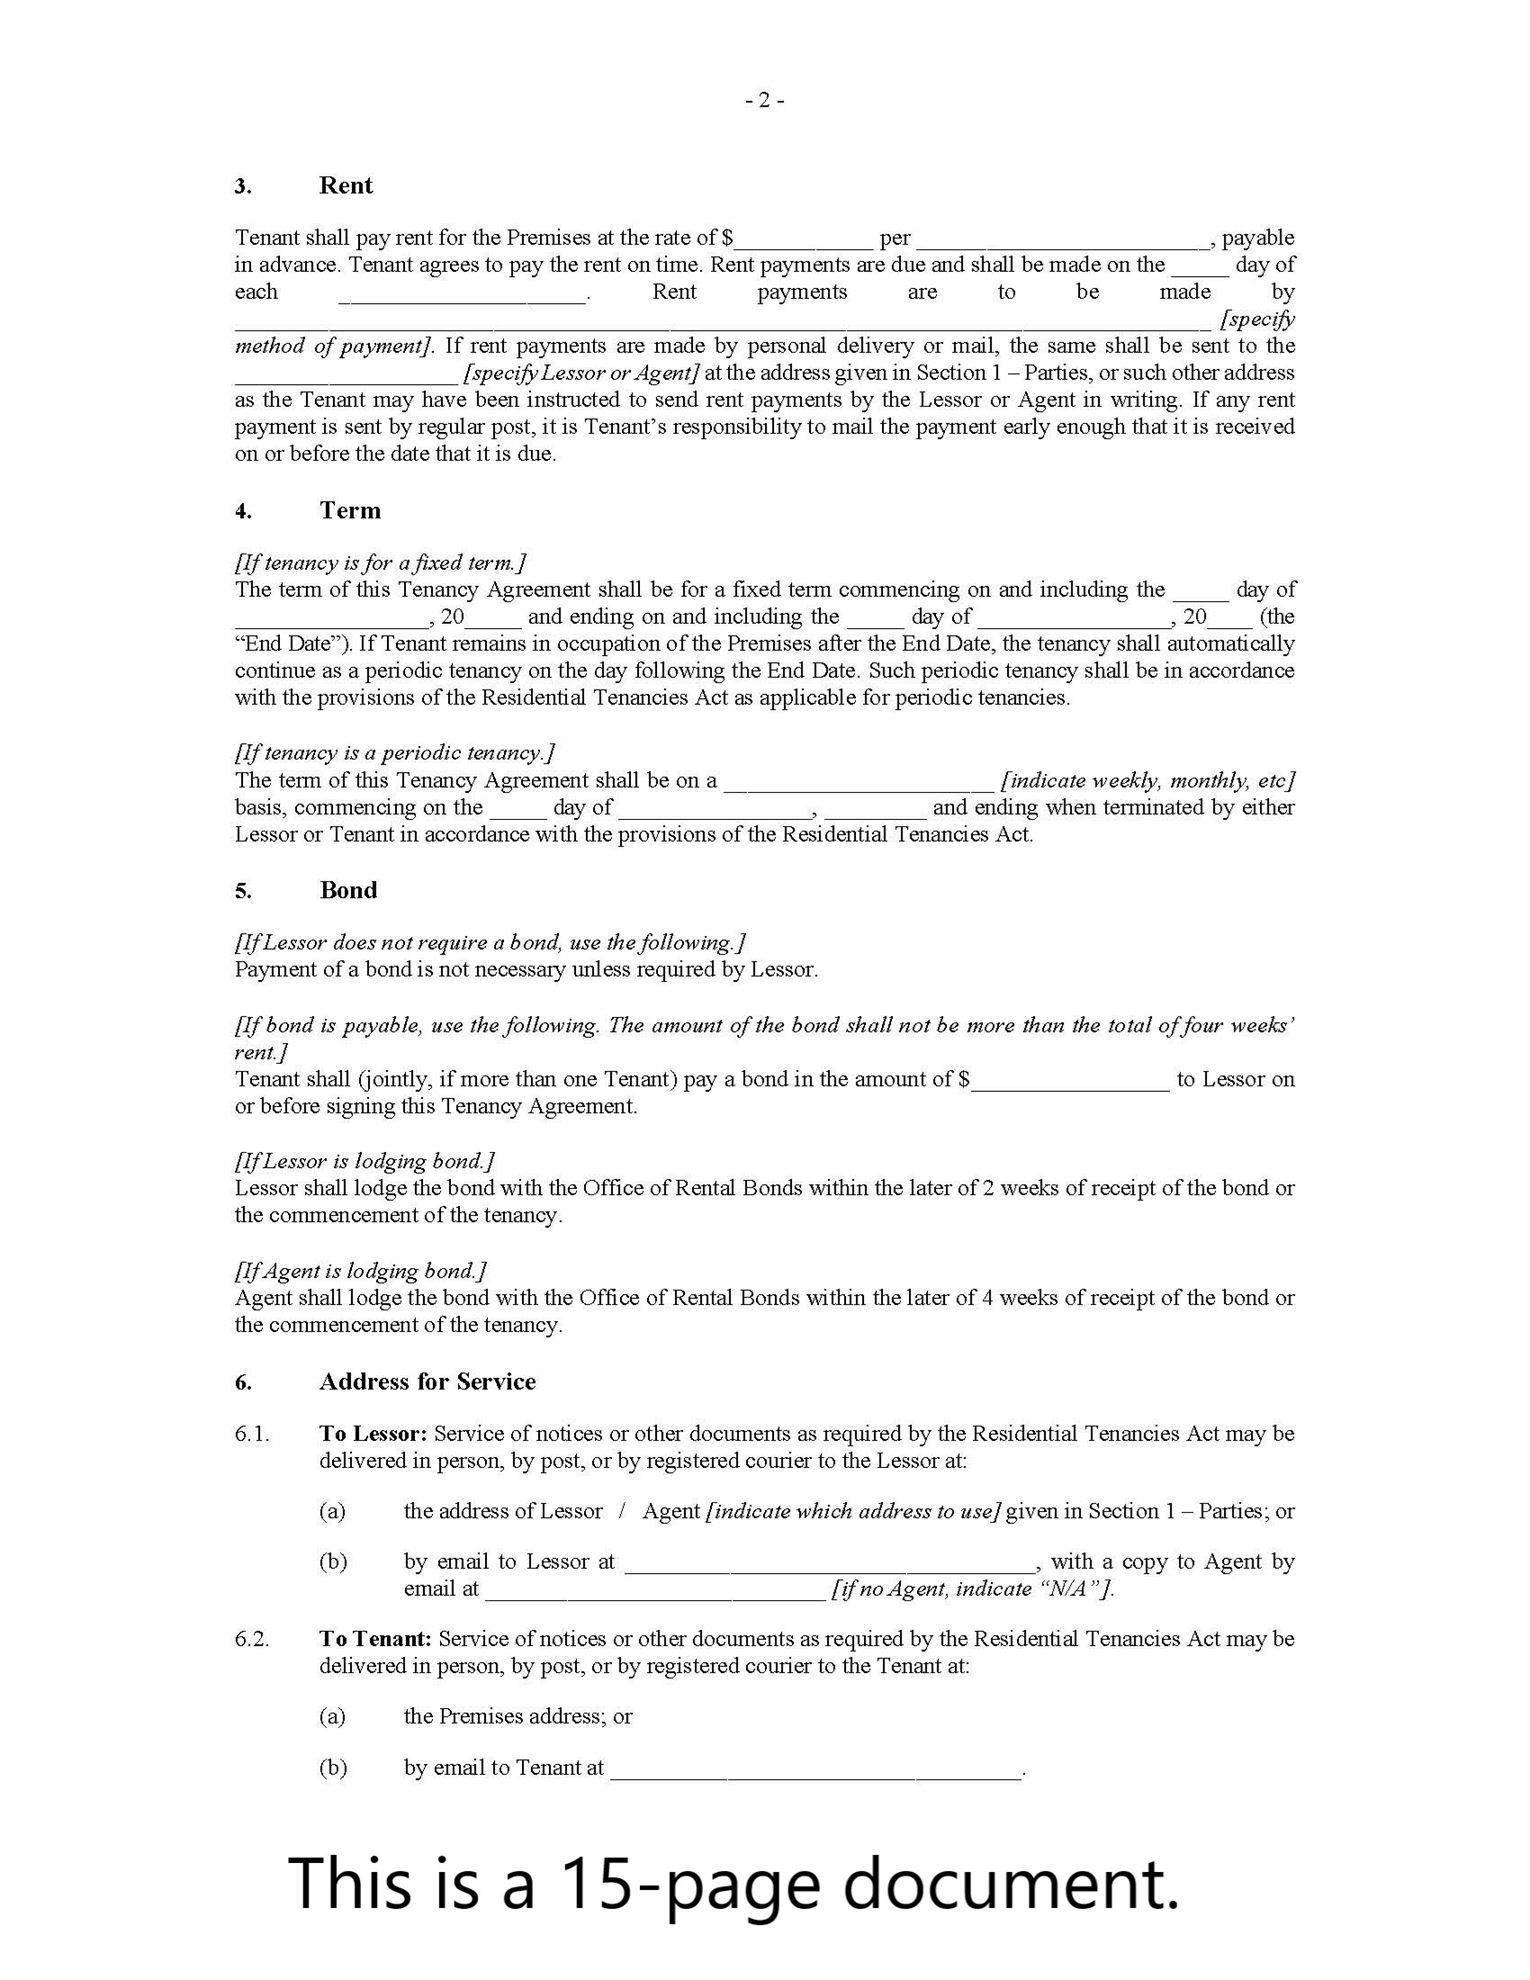 act-tenancy-agreement-form-legal-forms-and-business-templates